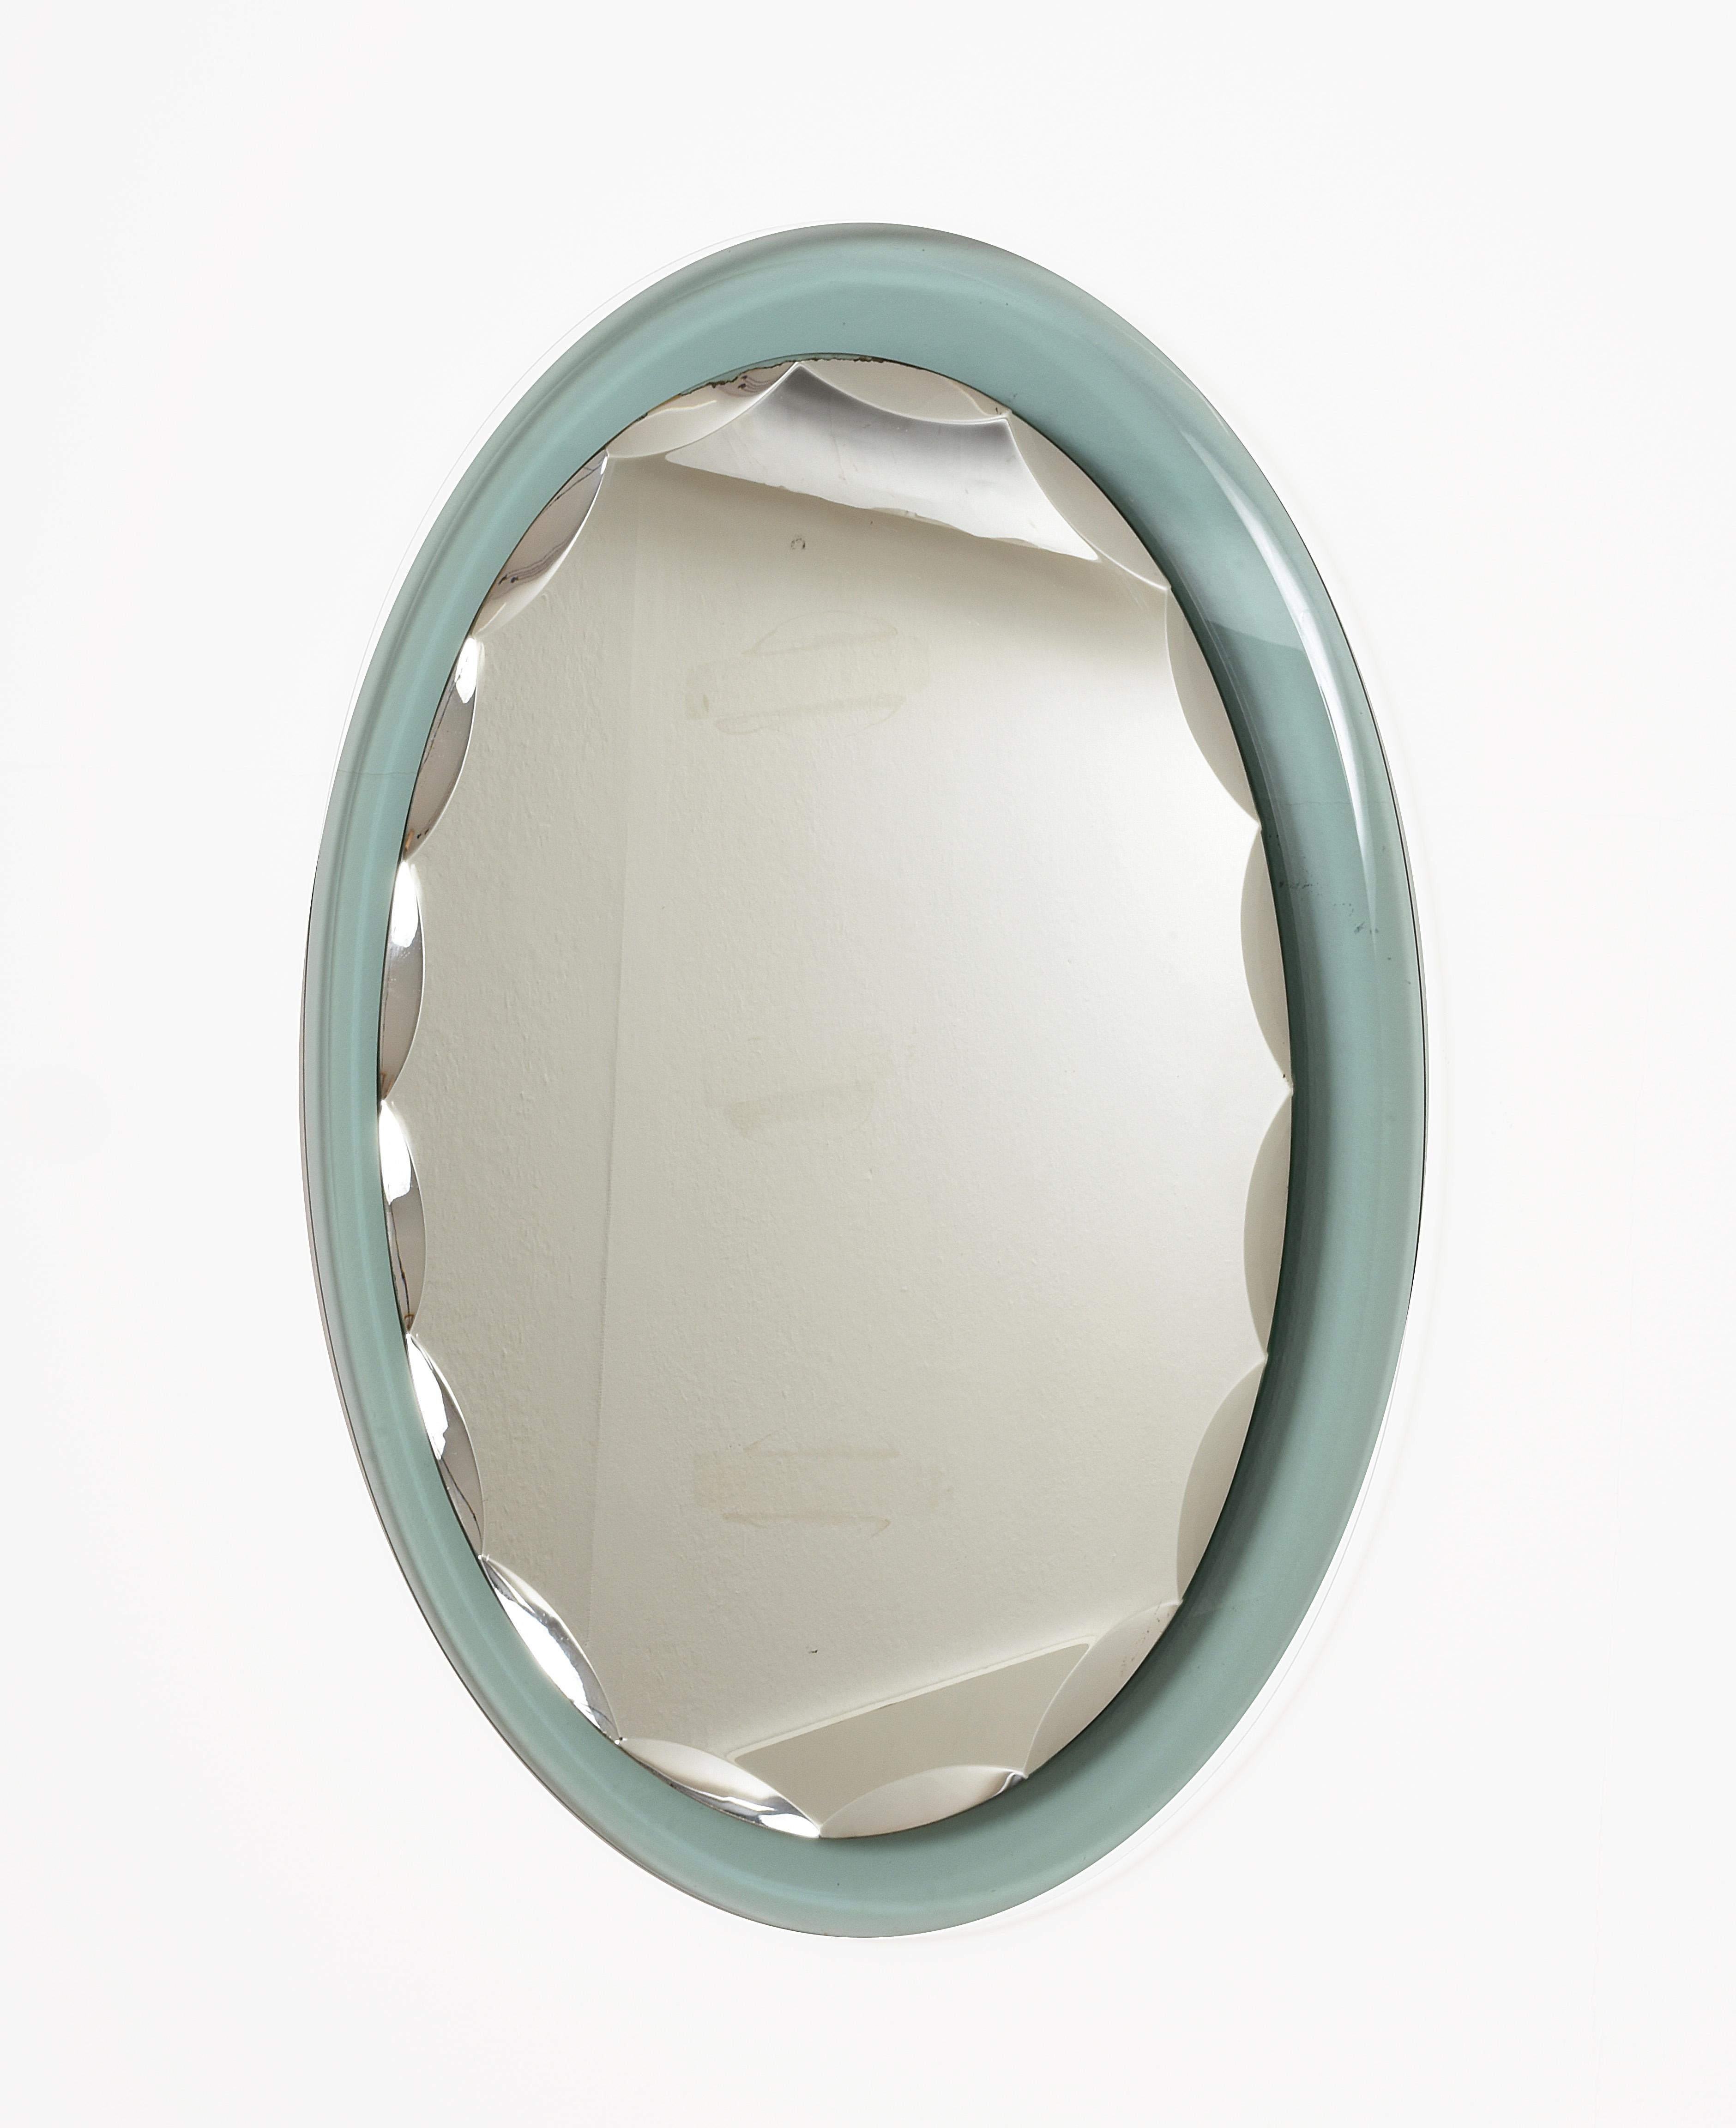 Beautiful mirror with light green frame and bevelled oval mirror.
This Italian Scalloped Mirror in the Style of Fontana Arte, Italy, 1960 is no longer available.
Mirror by Italian maker crystal Art. Green glass frame with decorative bevels on the